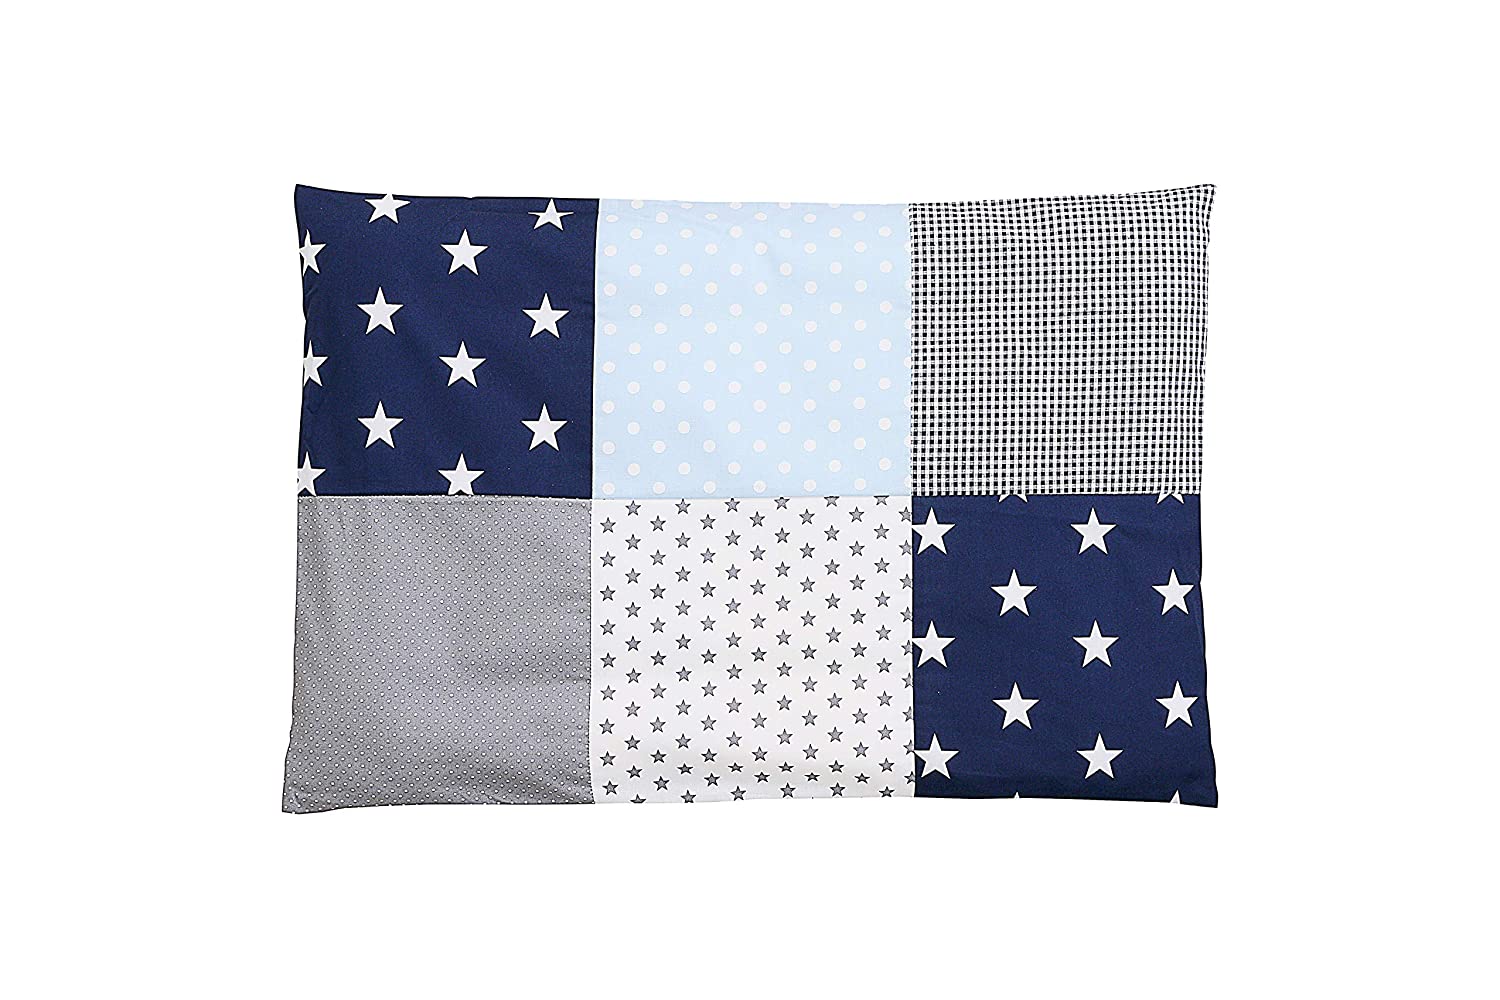 ULLENBOOM ® Cushion Cover 40 x 60 cm Children and Baby Mint Grey (Made in EU) - Cotton Pillow Case with Zip - Cover Also Suitable for Decorative Cushions - Stars Motif - Patchwork Design